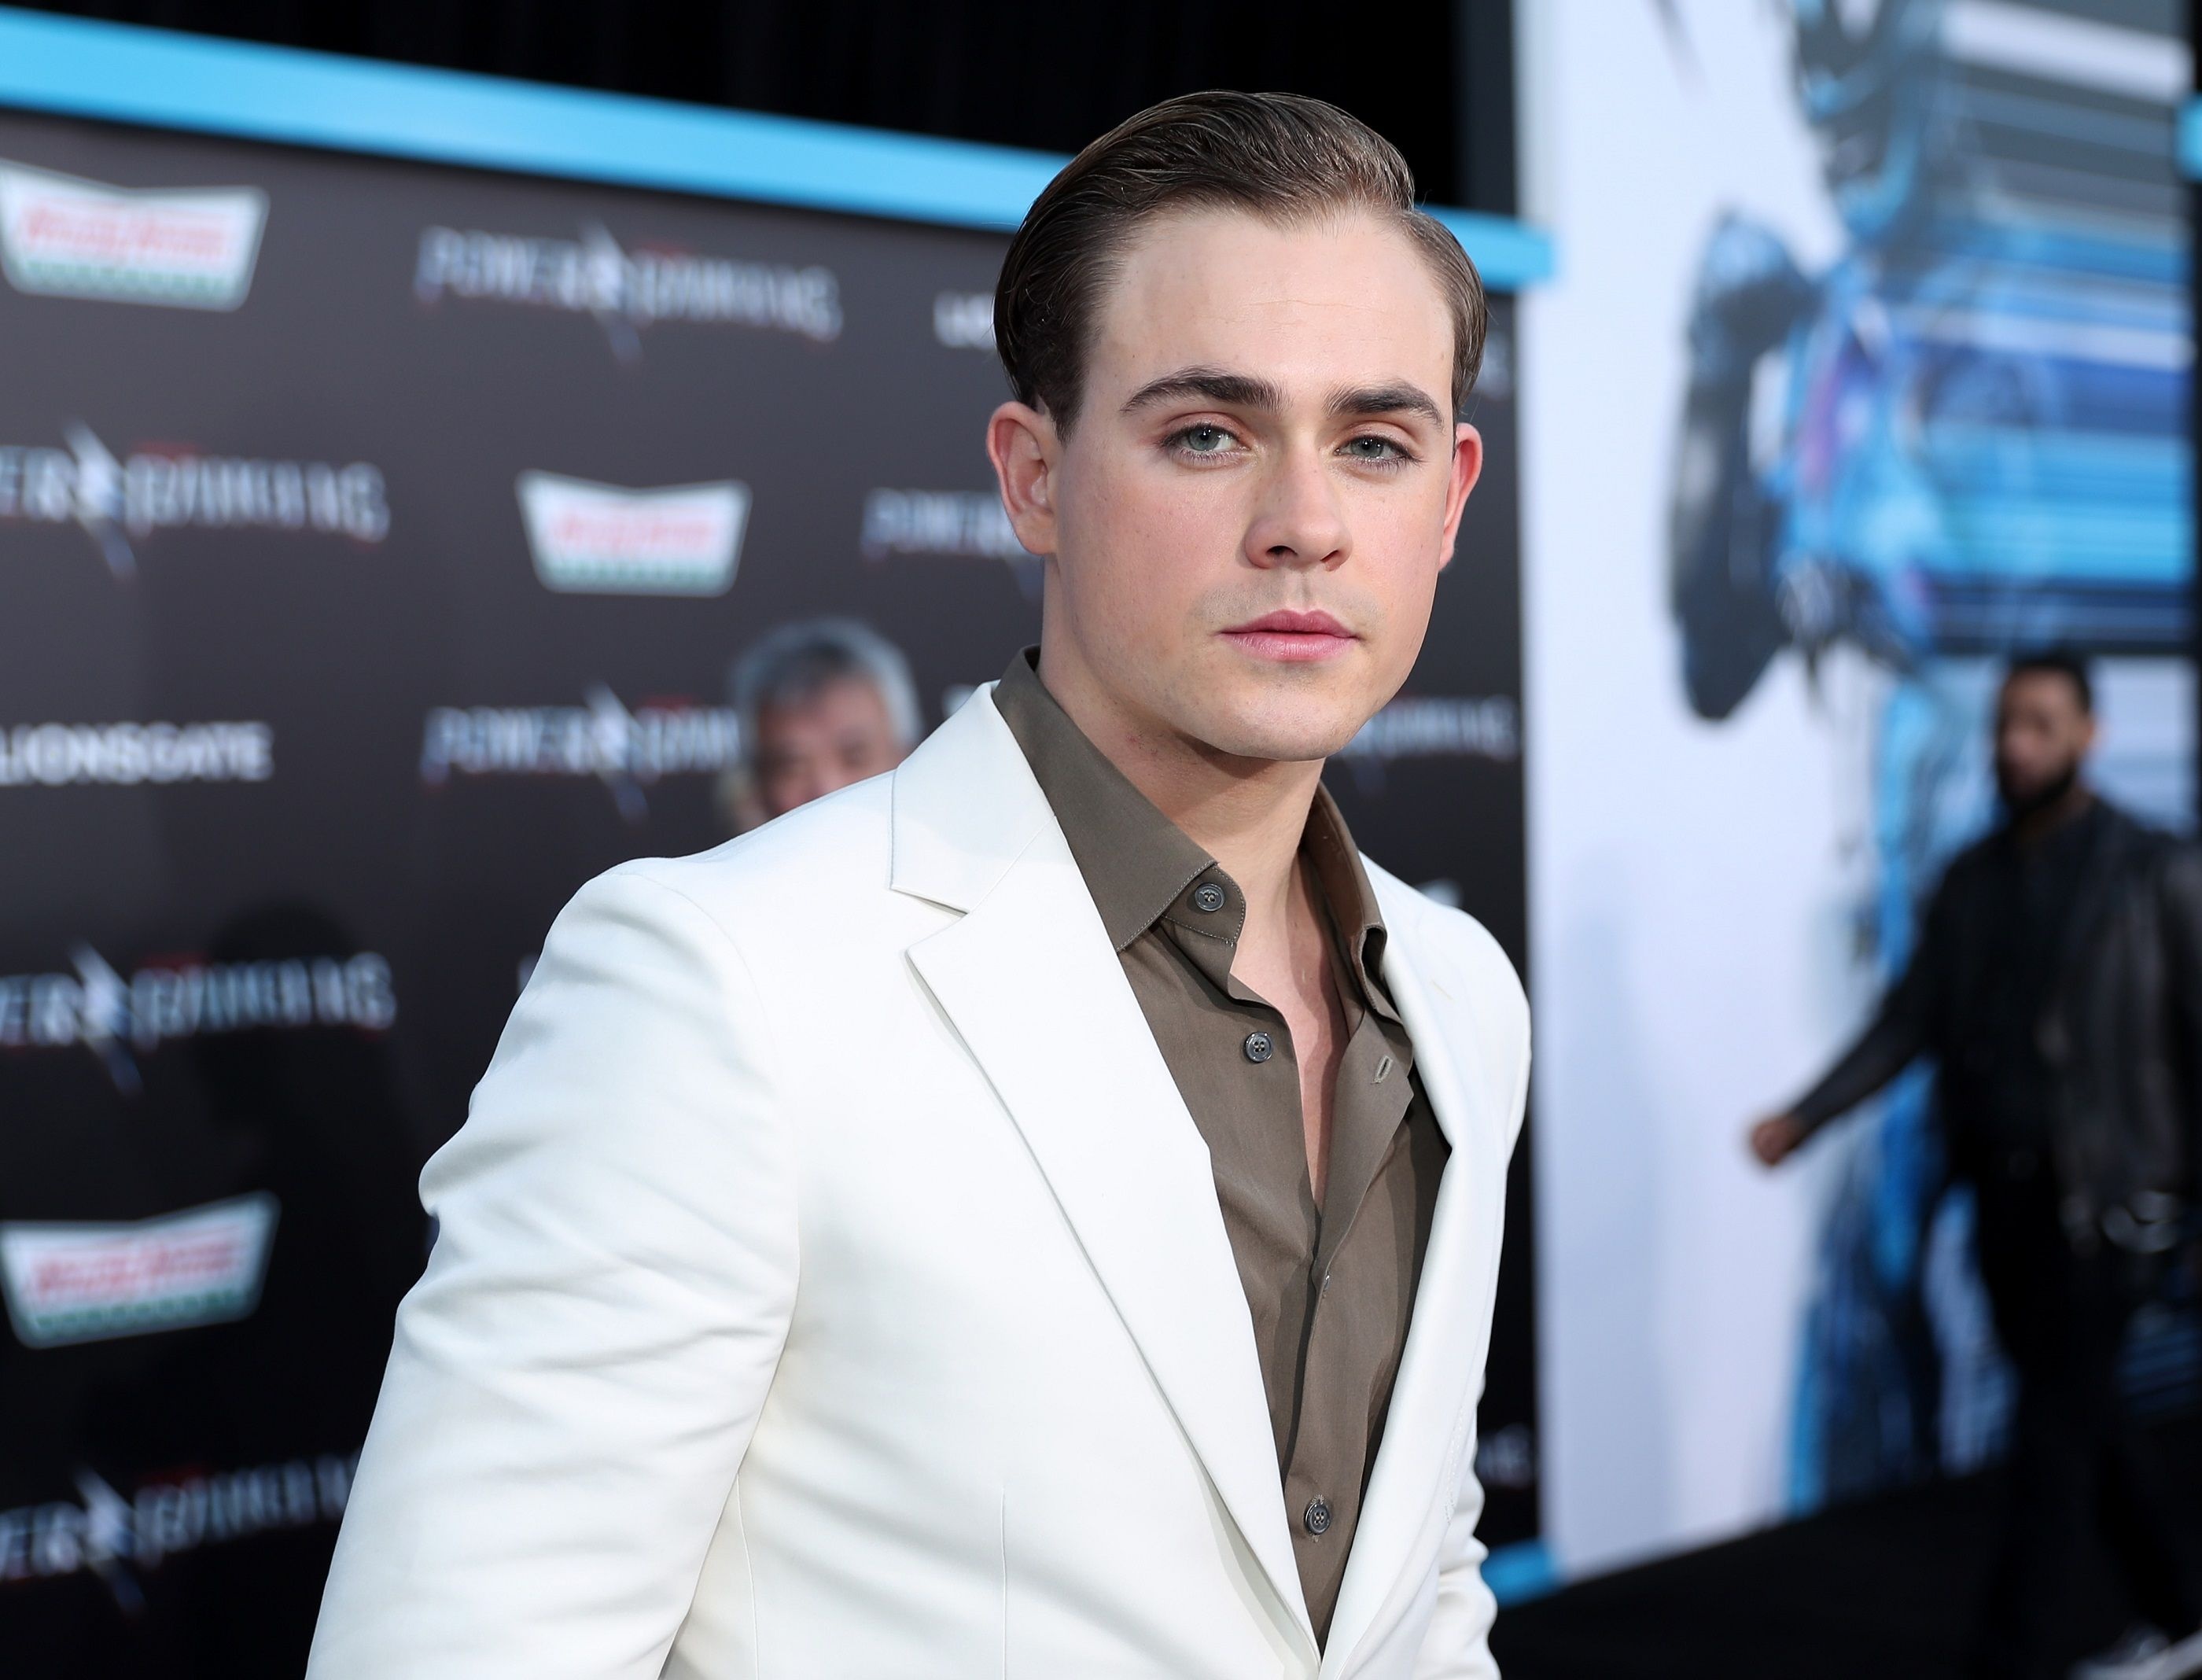 Dacre Montgomery TV shows, Stranger Things star, Next movie confirmed, Rising actor, 2800x2140 HD Desktop